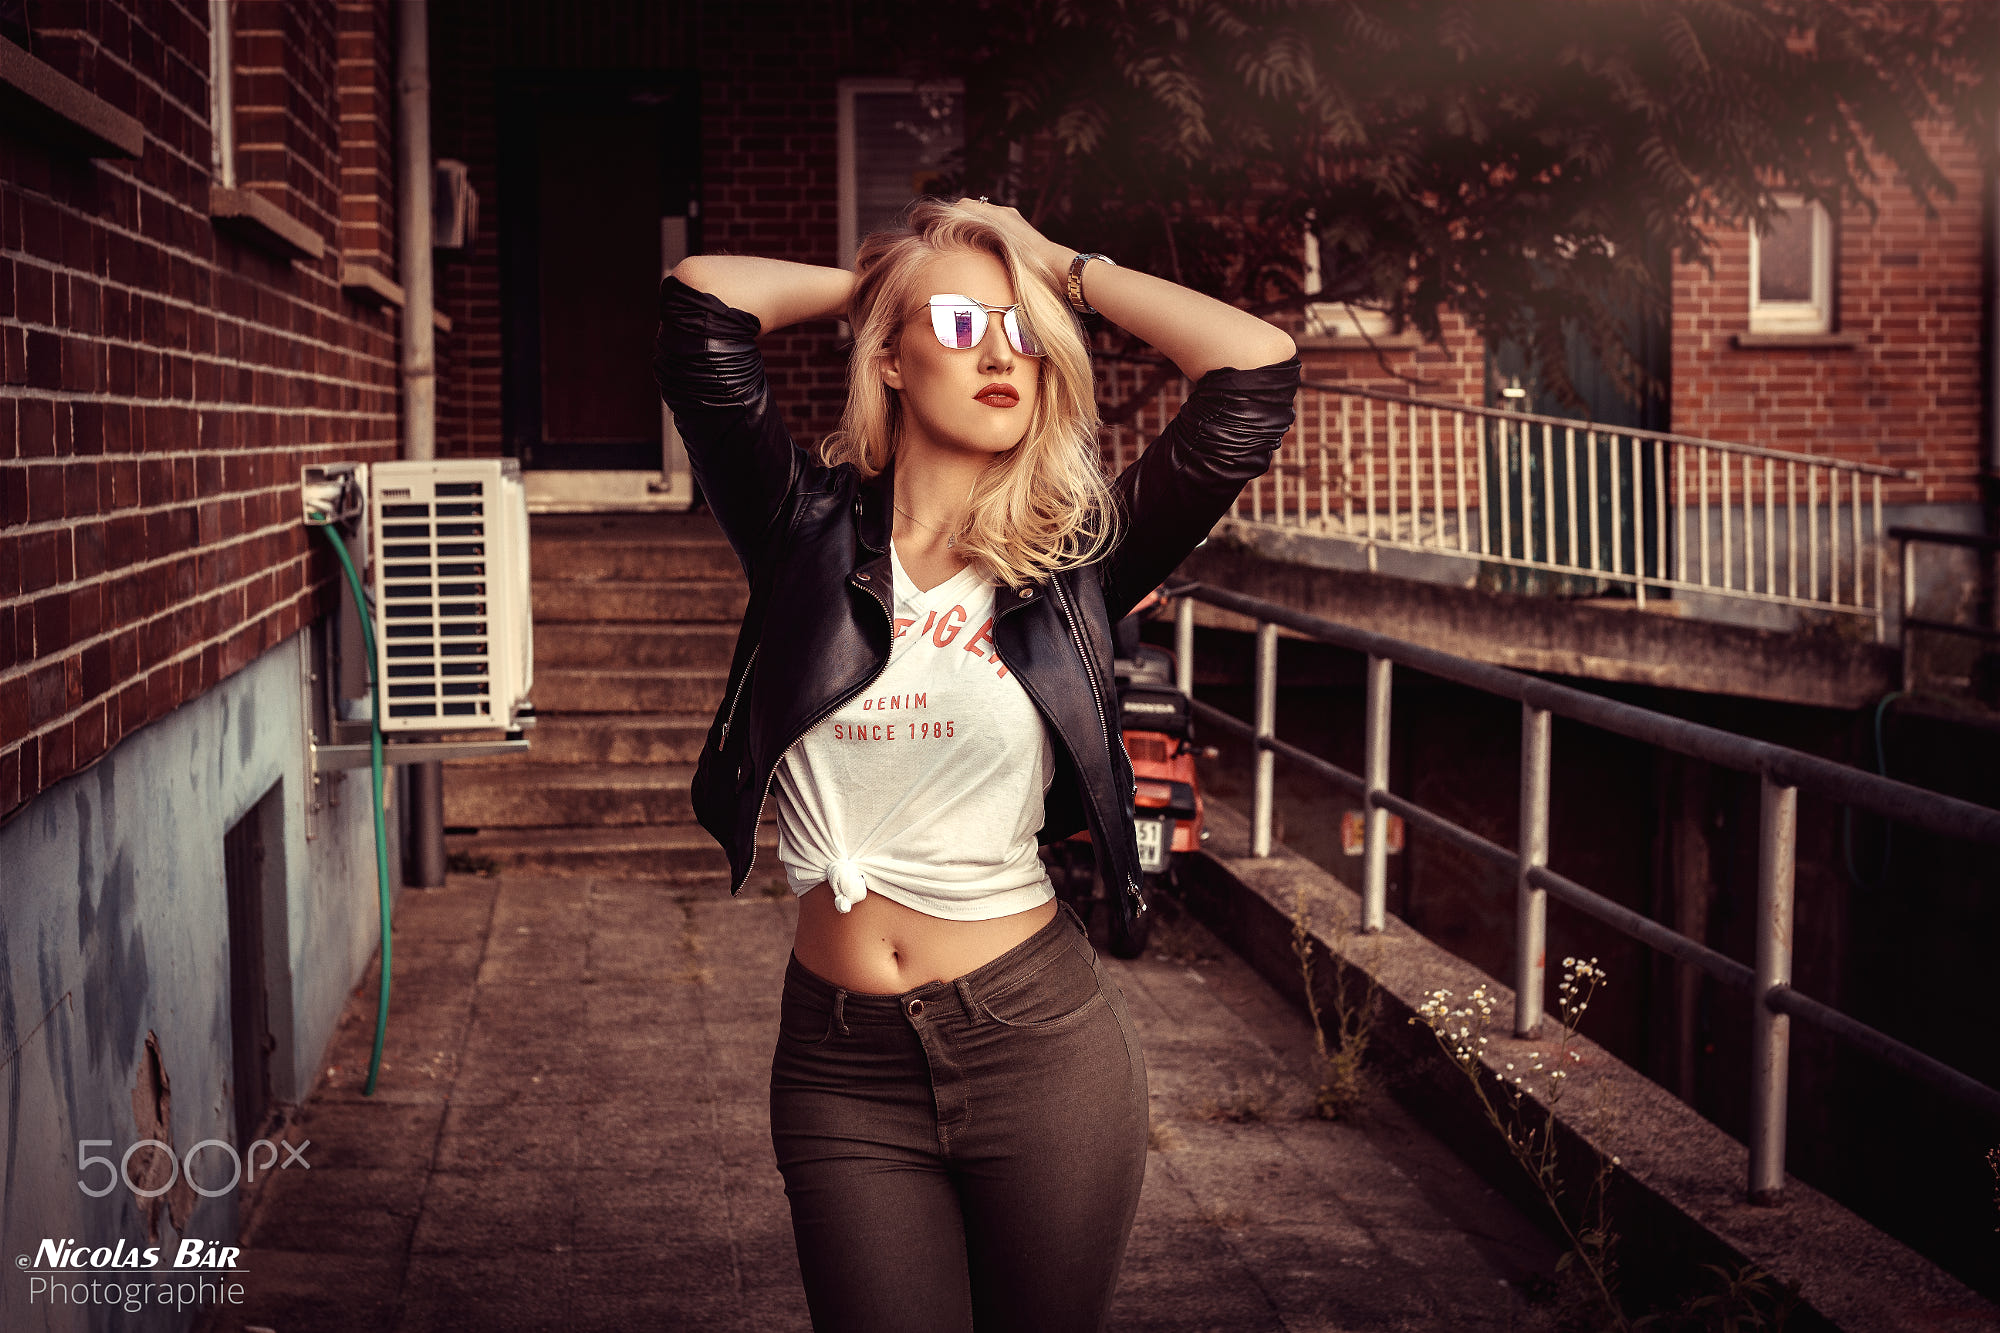 Women Blonde Hips Women Outdoors Standing Leather Jackets Red Lipstick Women With Shades Hands In Ha 2000x1333